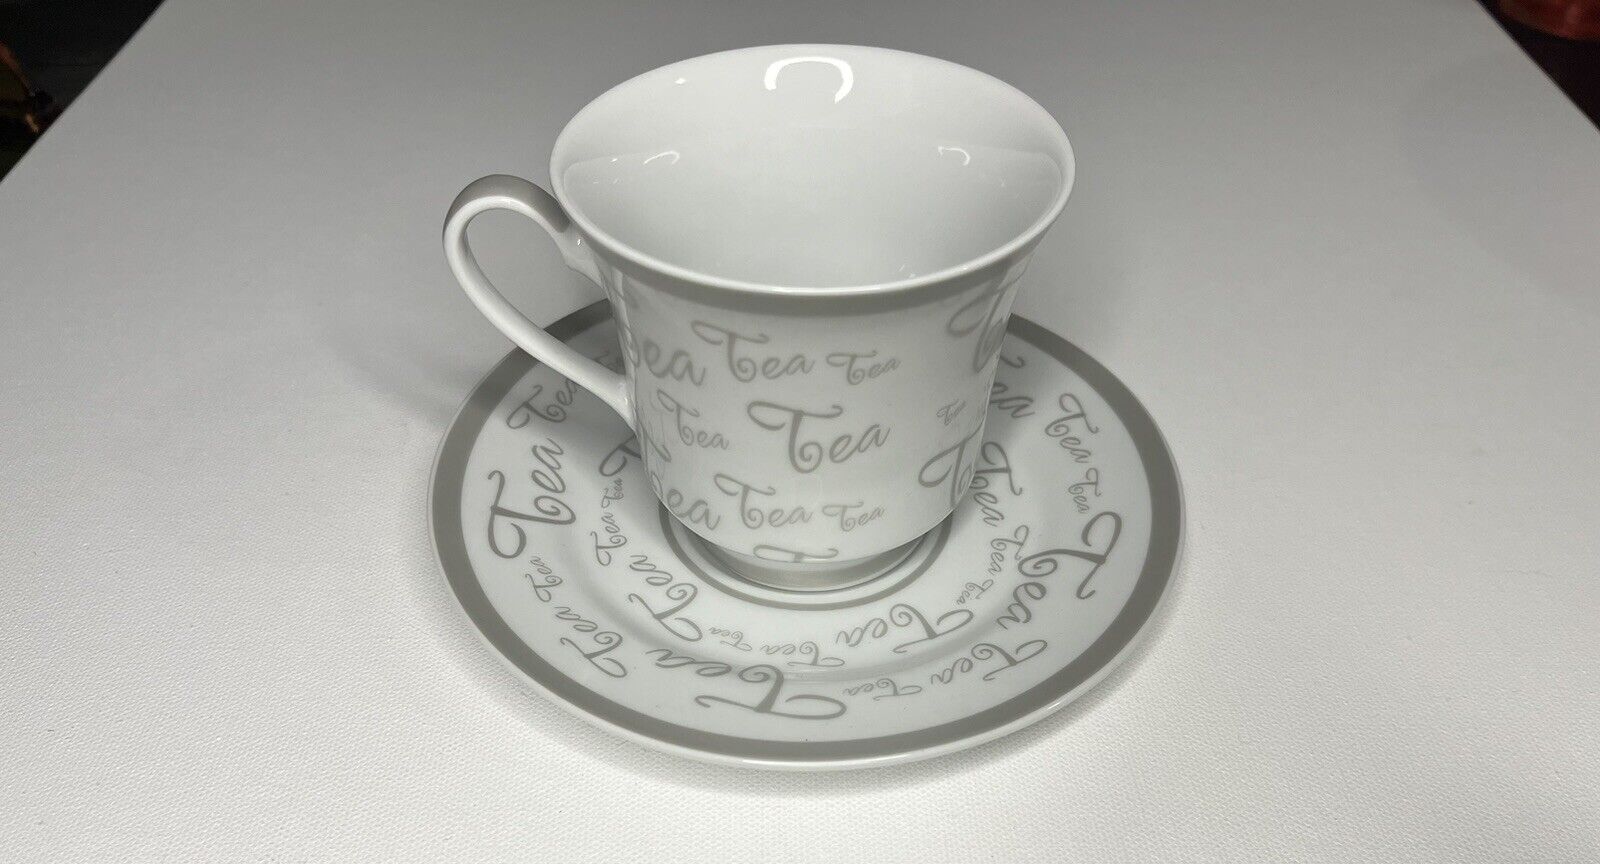 Darice TeaCup and Saucer White and Gold With “Tea” Written.